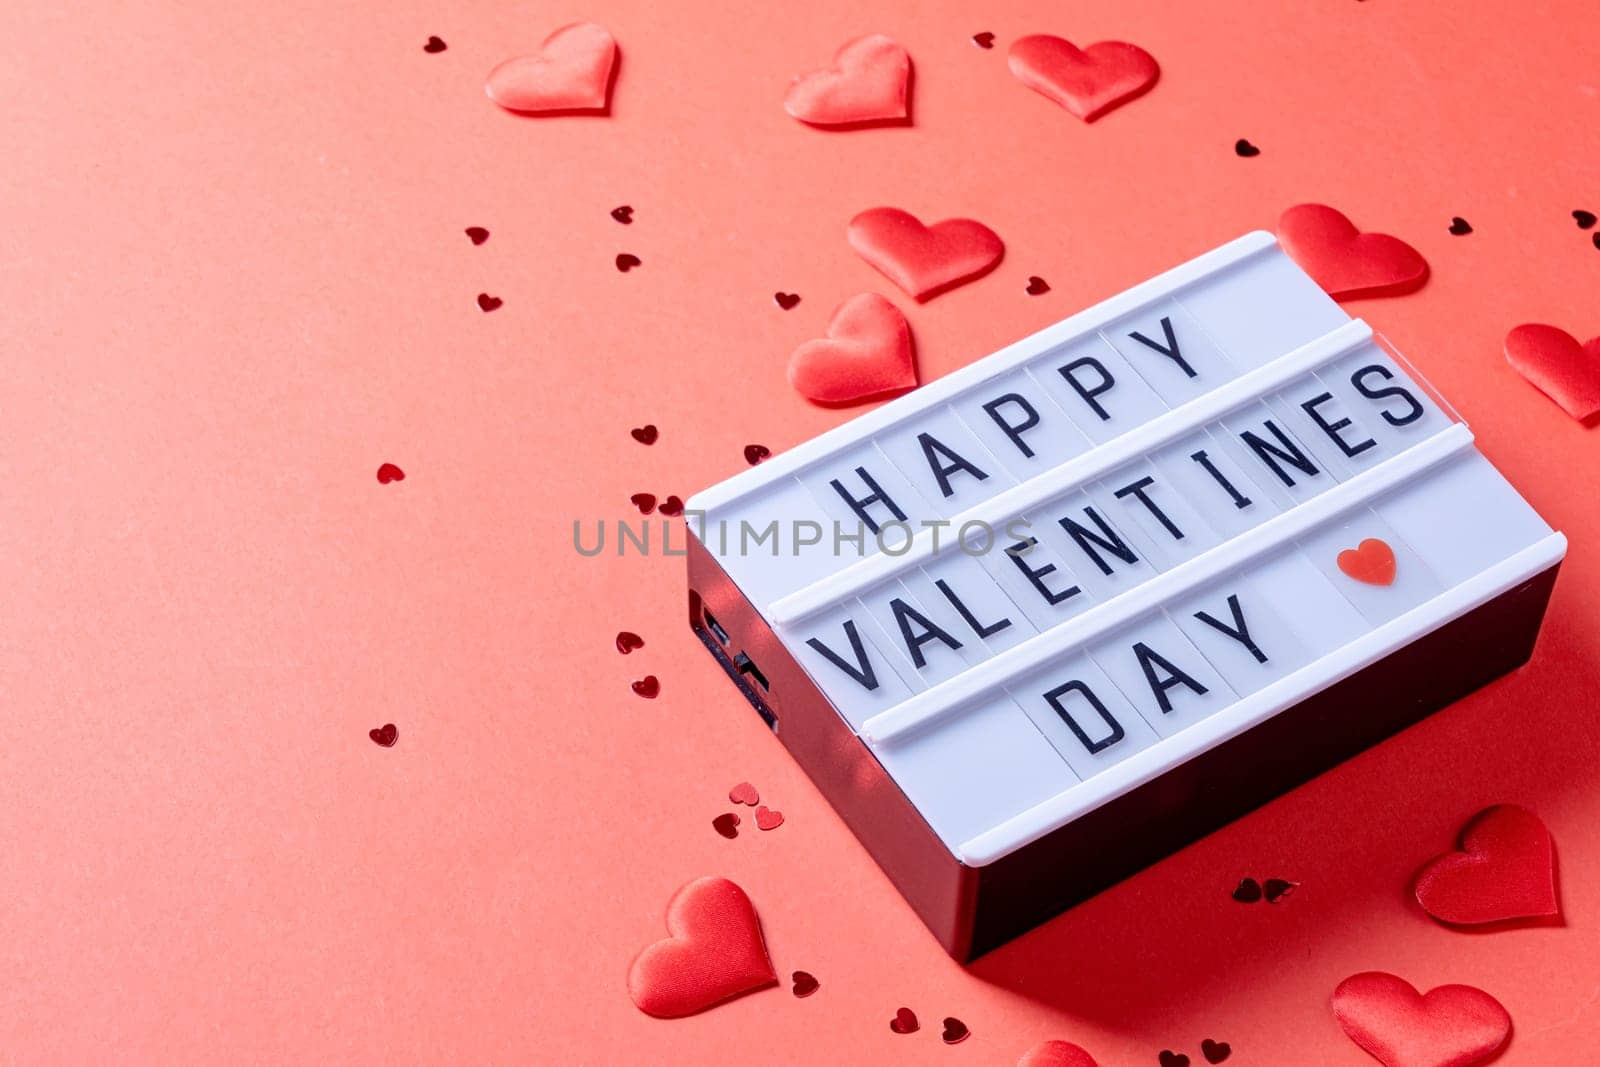 letter board with words Happy Valentines Day on red background by Desperada